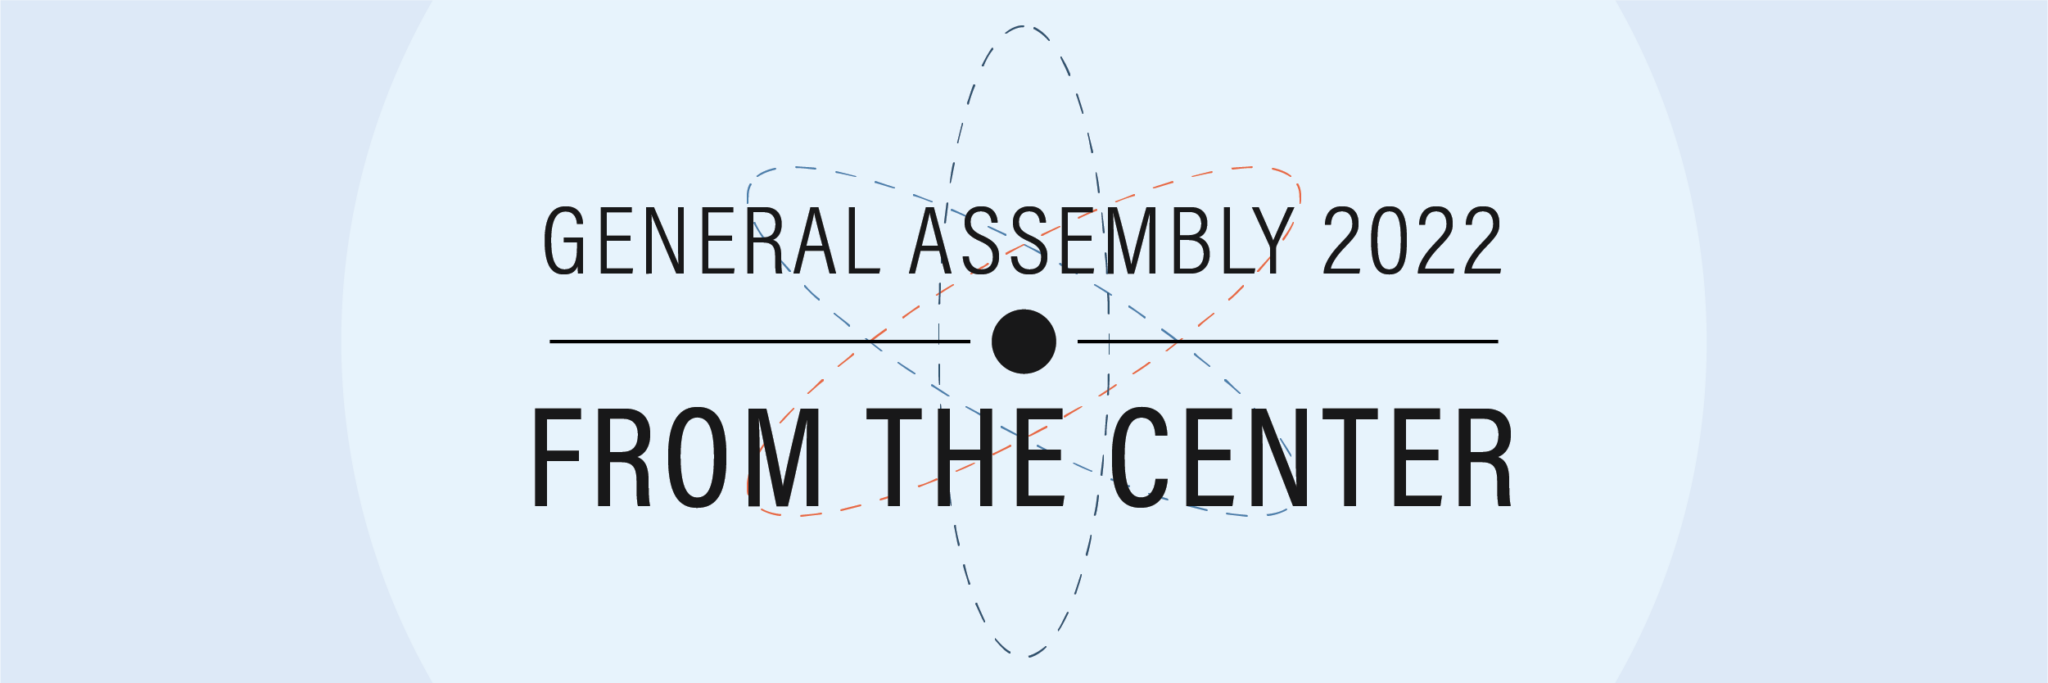 General Assembly 2022: From the Center